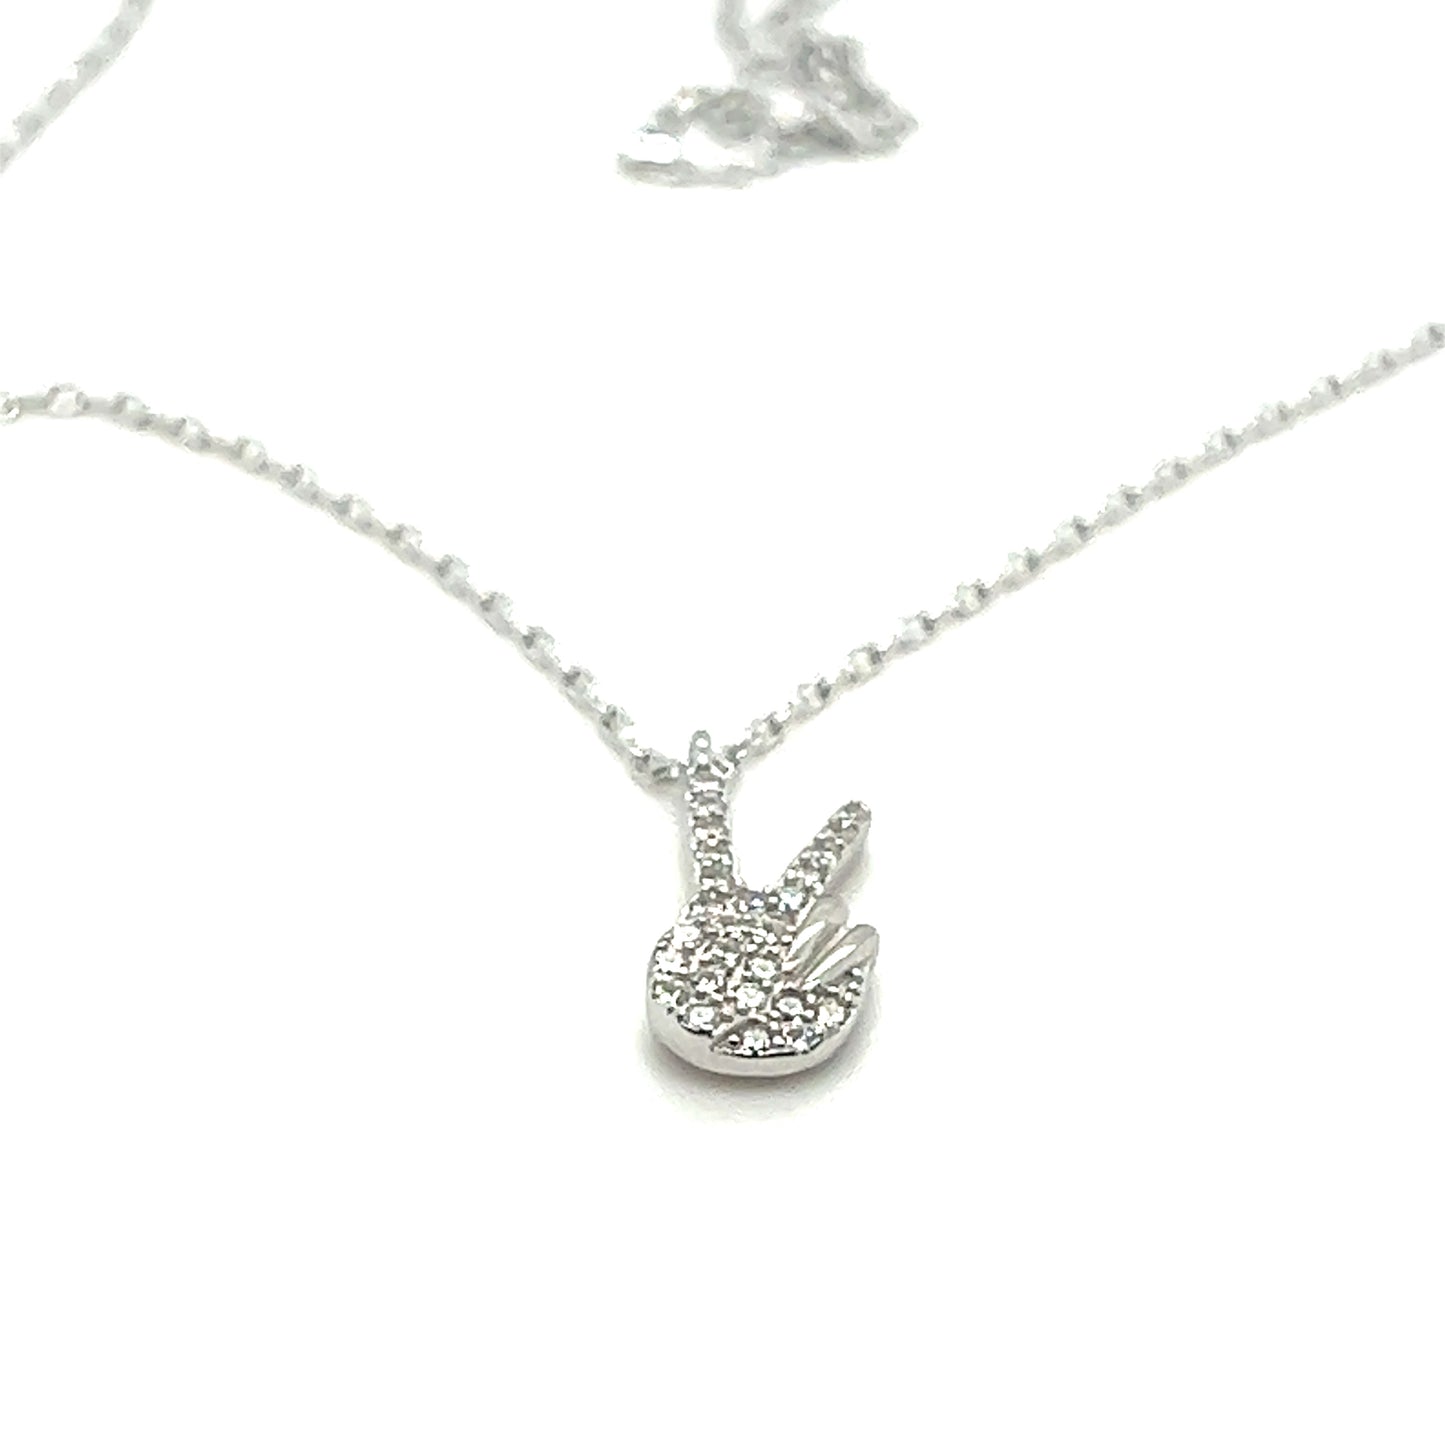 A Glitzy Peace Sign Necklace with a diamond pendant on it. Super Silver jewelry.